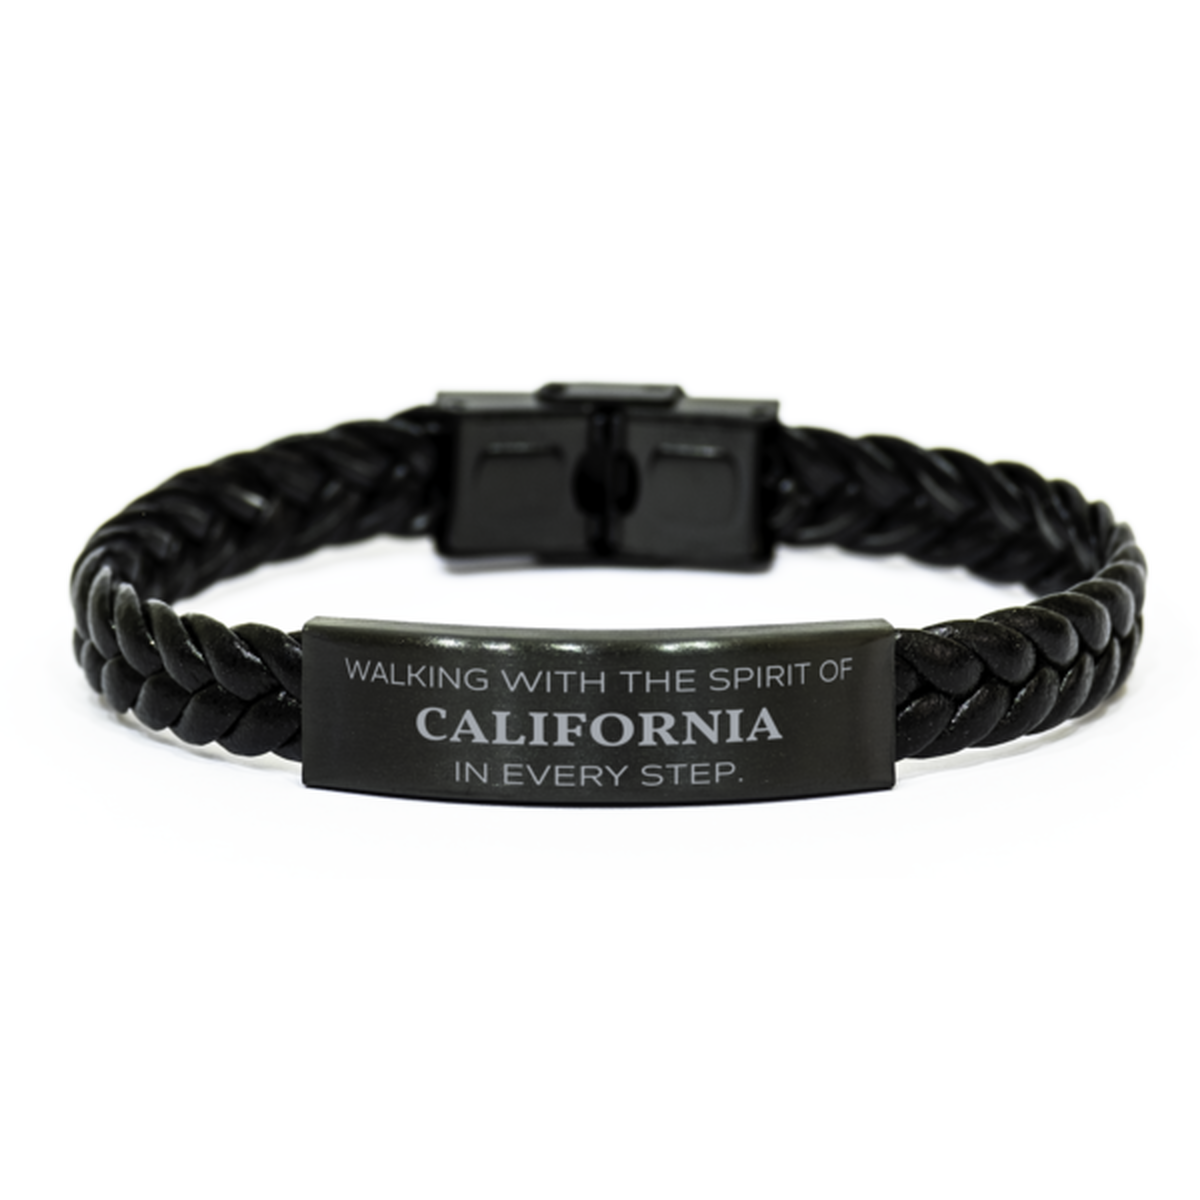 California Gifts, Walking with the spirit, Love California Birthday Christmas Braided Leather Bracelet For California People, Men, Women, Friends